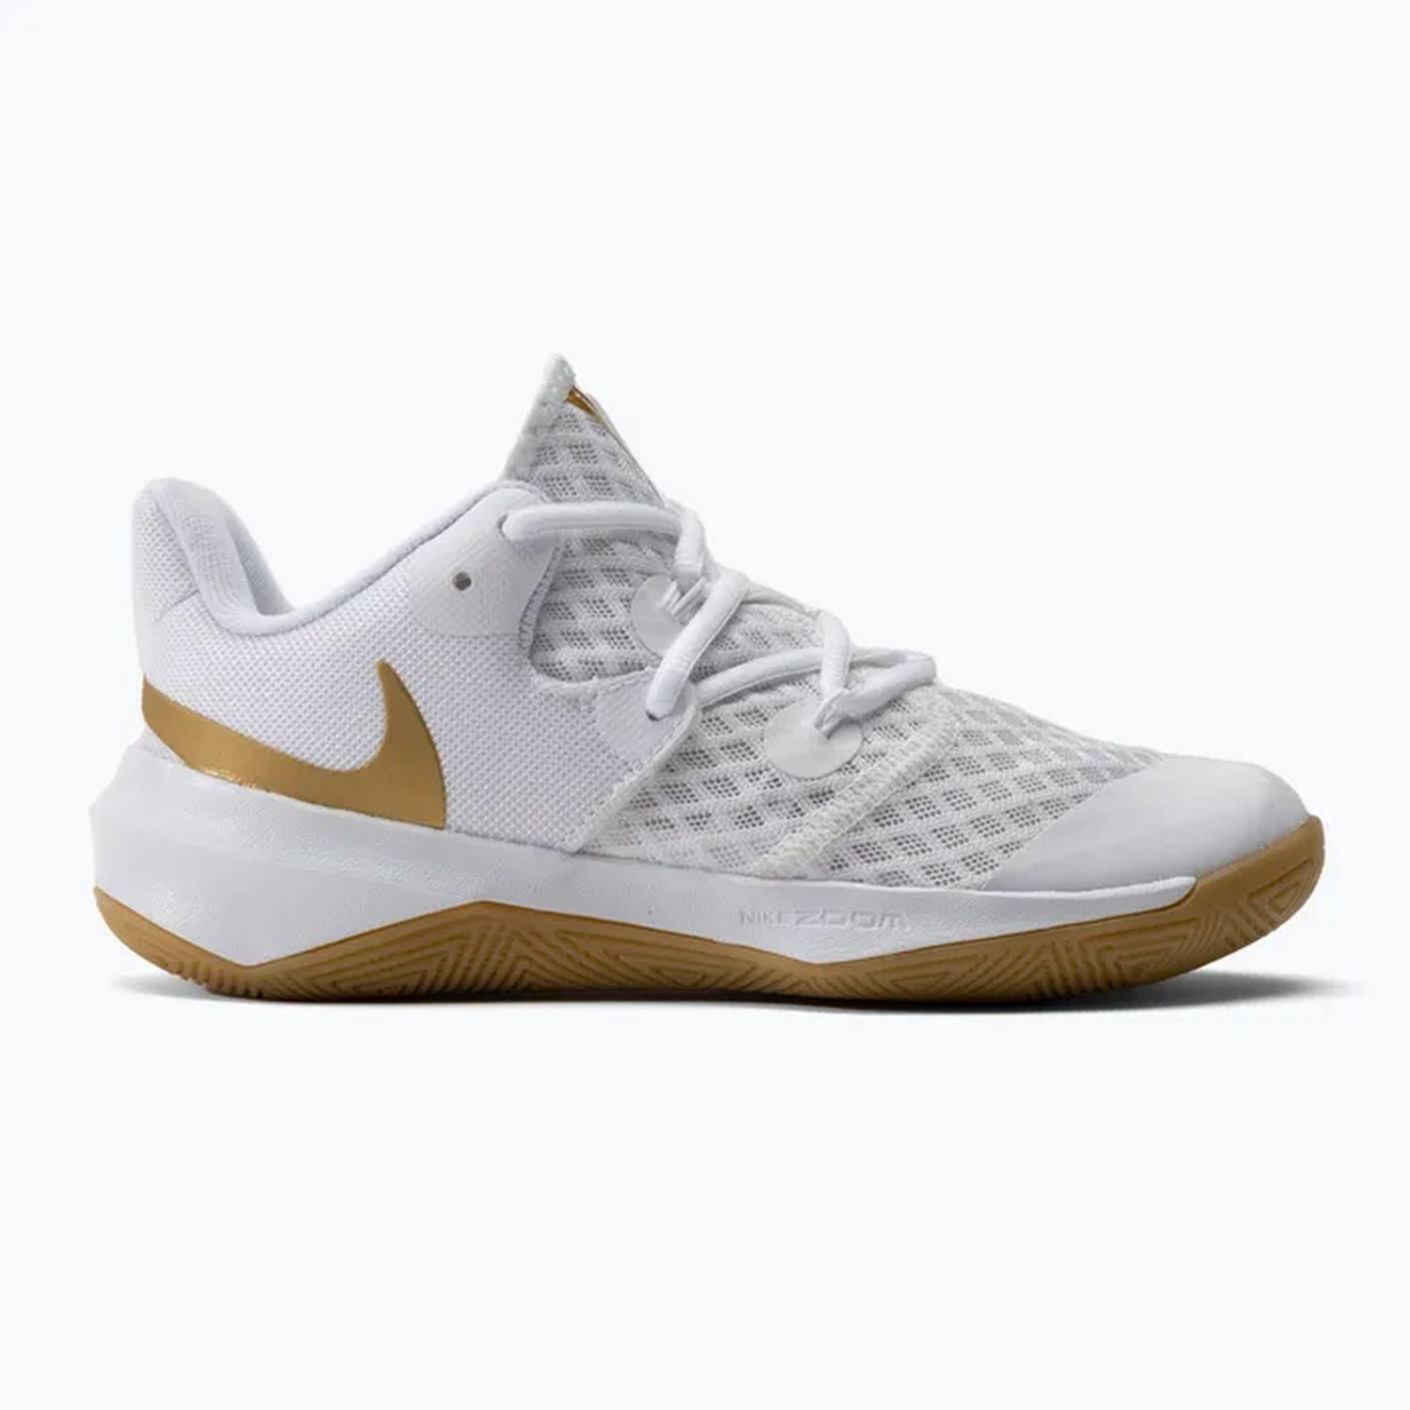 Nike Zoom Hyperspeed Court White/Gold